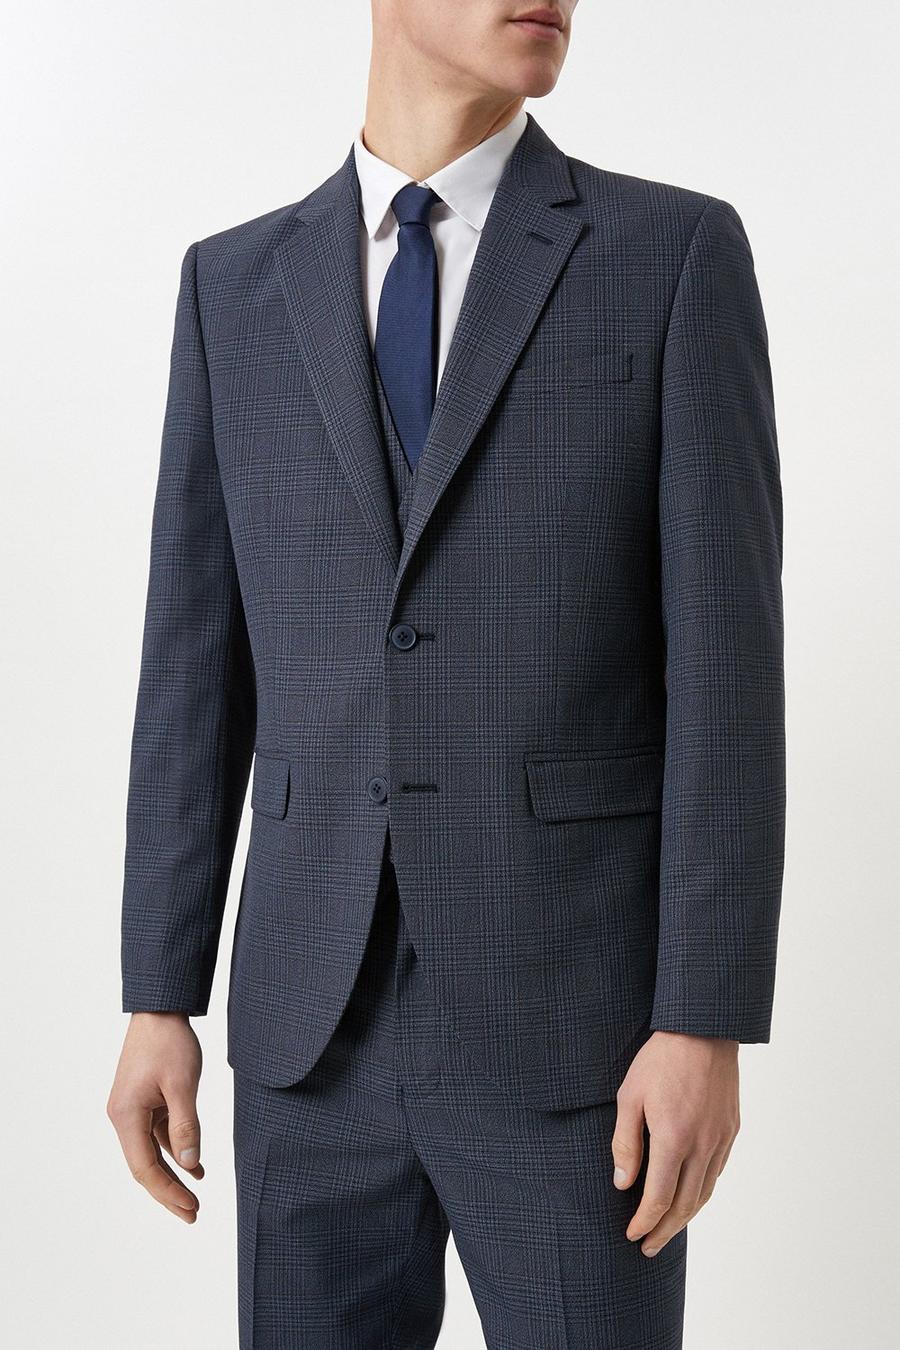 Tailored Fit Navy Overcheck Three-Piece Suit